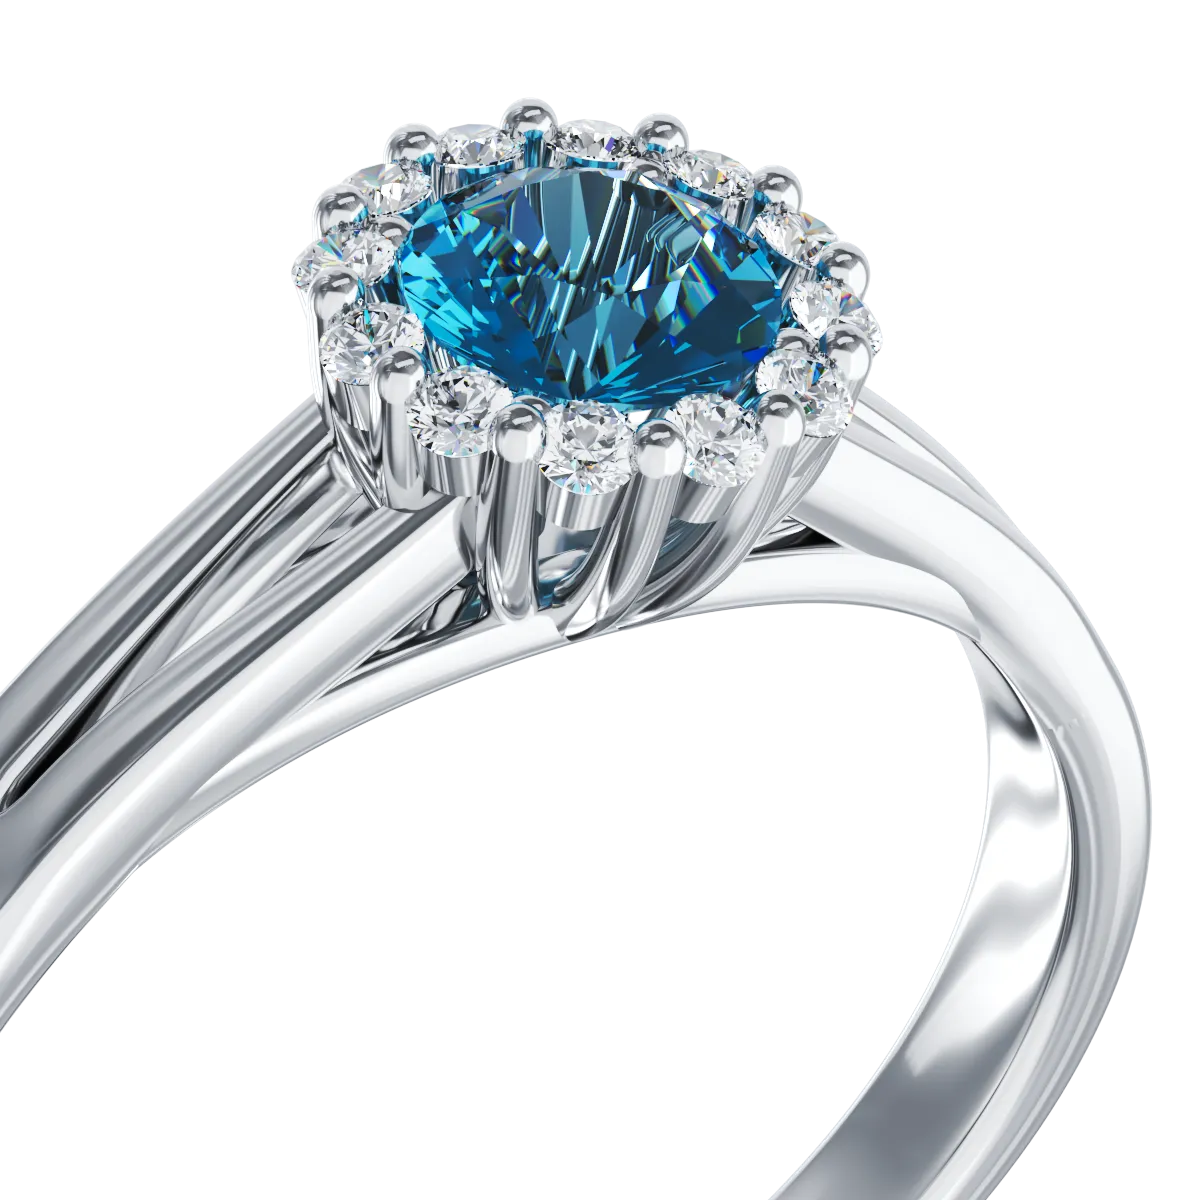 18K white gold engagement ring with 0.22ct blue diamond and 0.1ct diamonds